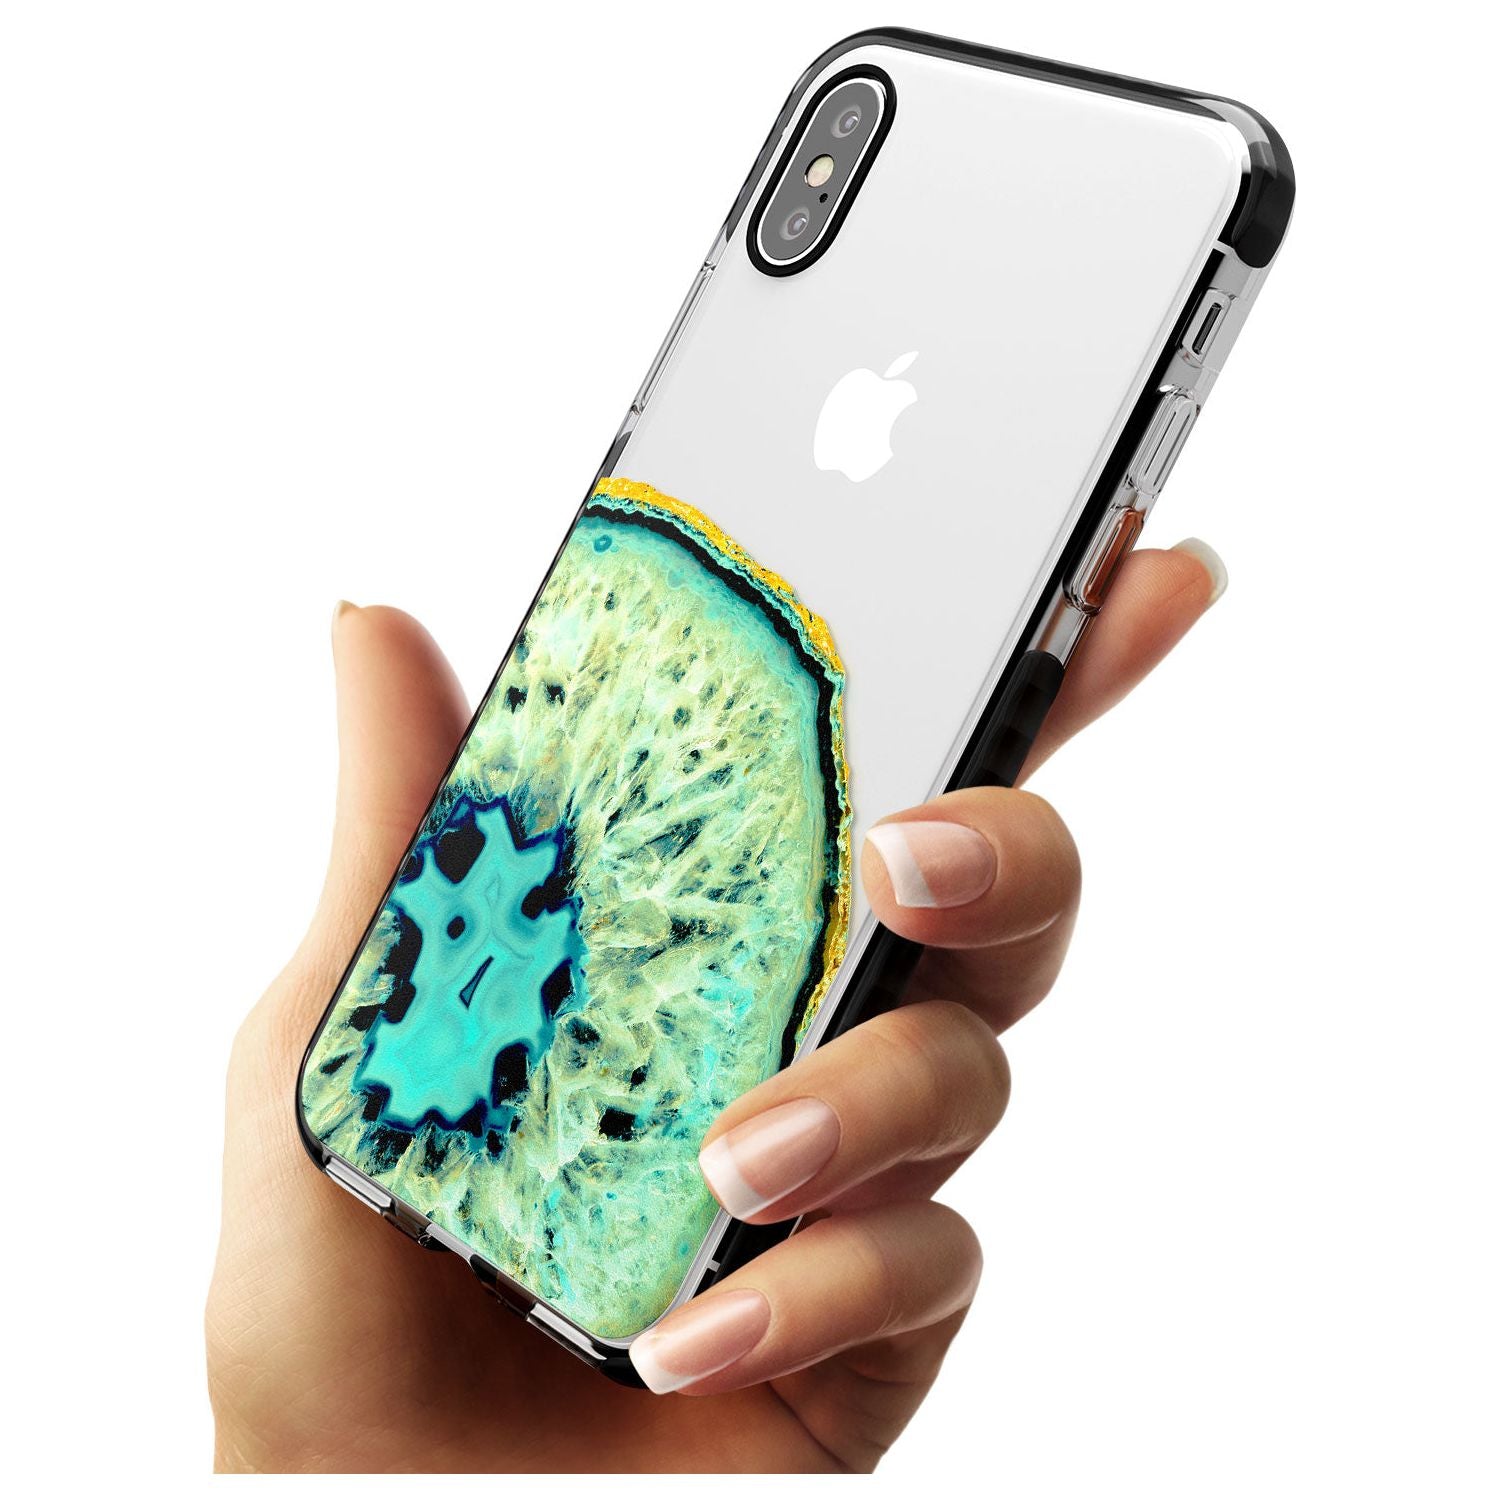 Turquoise & Green Gemstone Crystal Clear Design Black Impact Phone Case for iPhone X XS Max XR